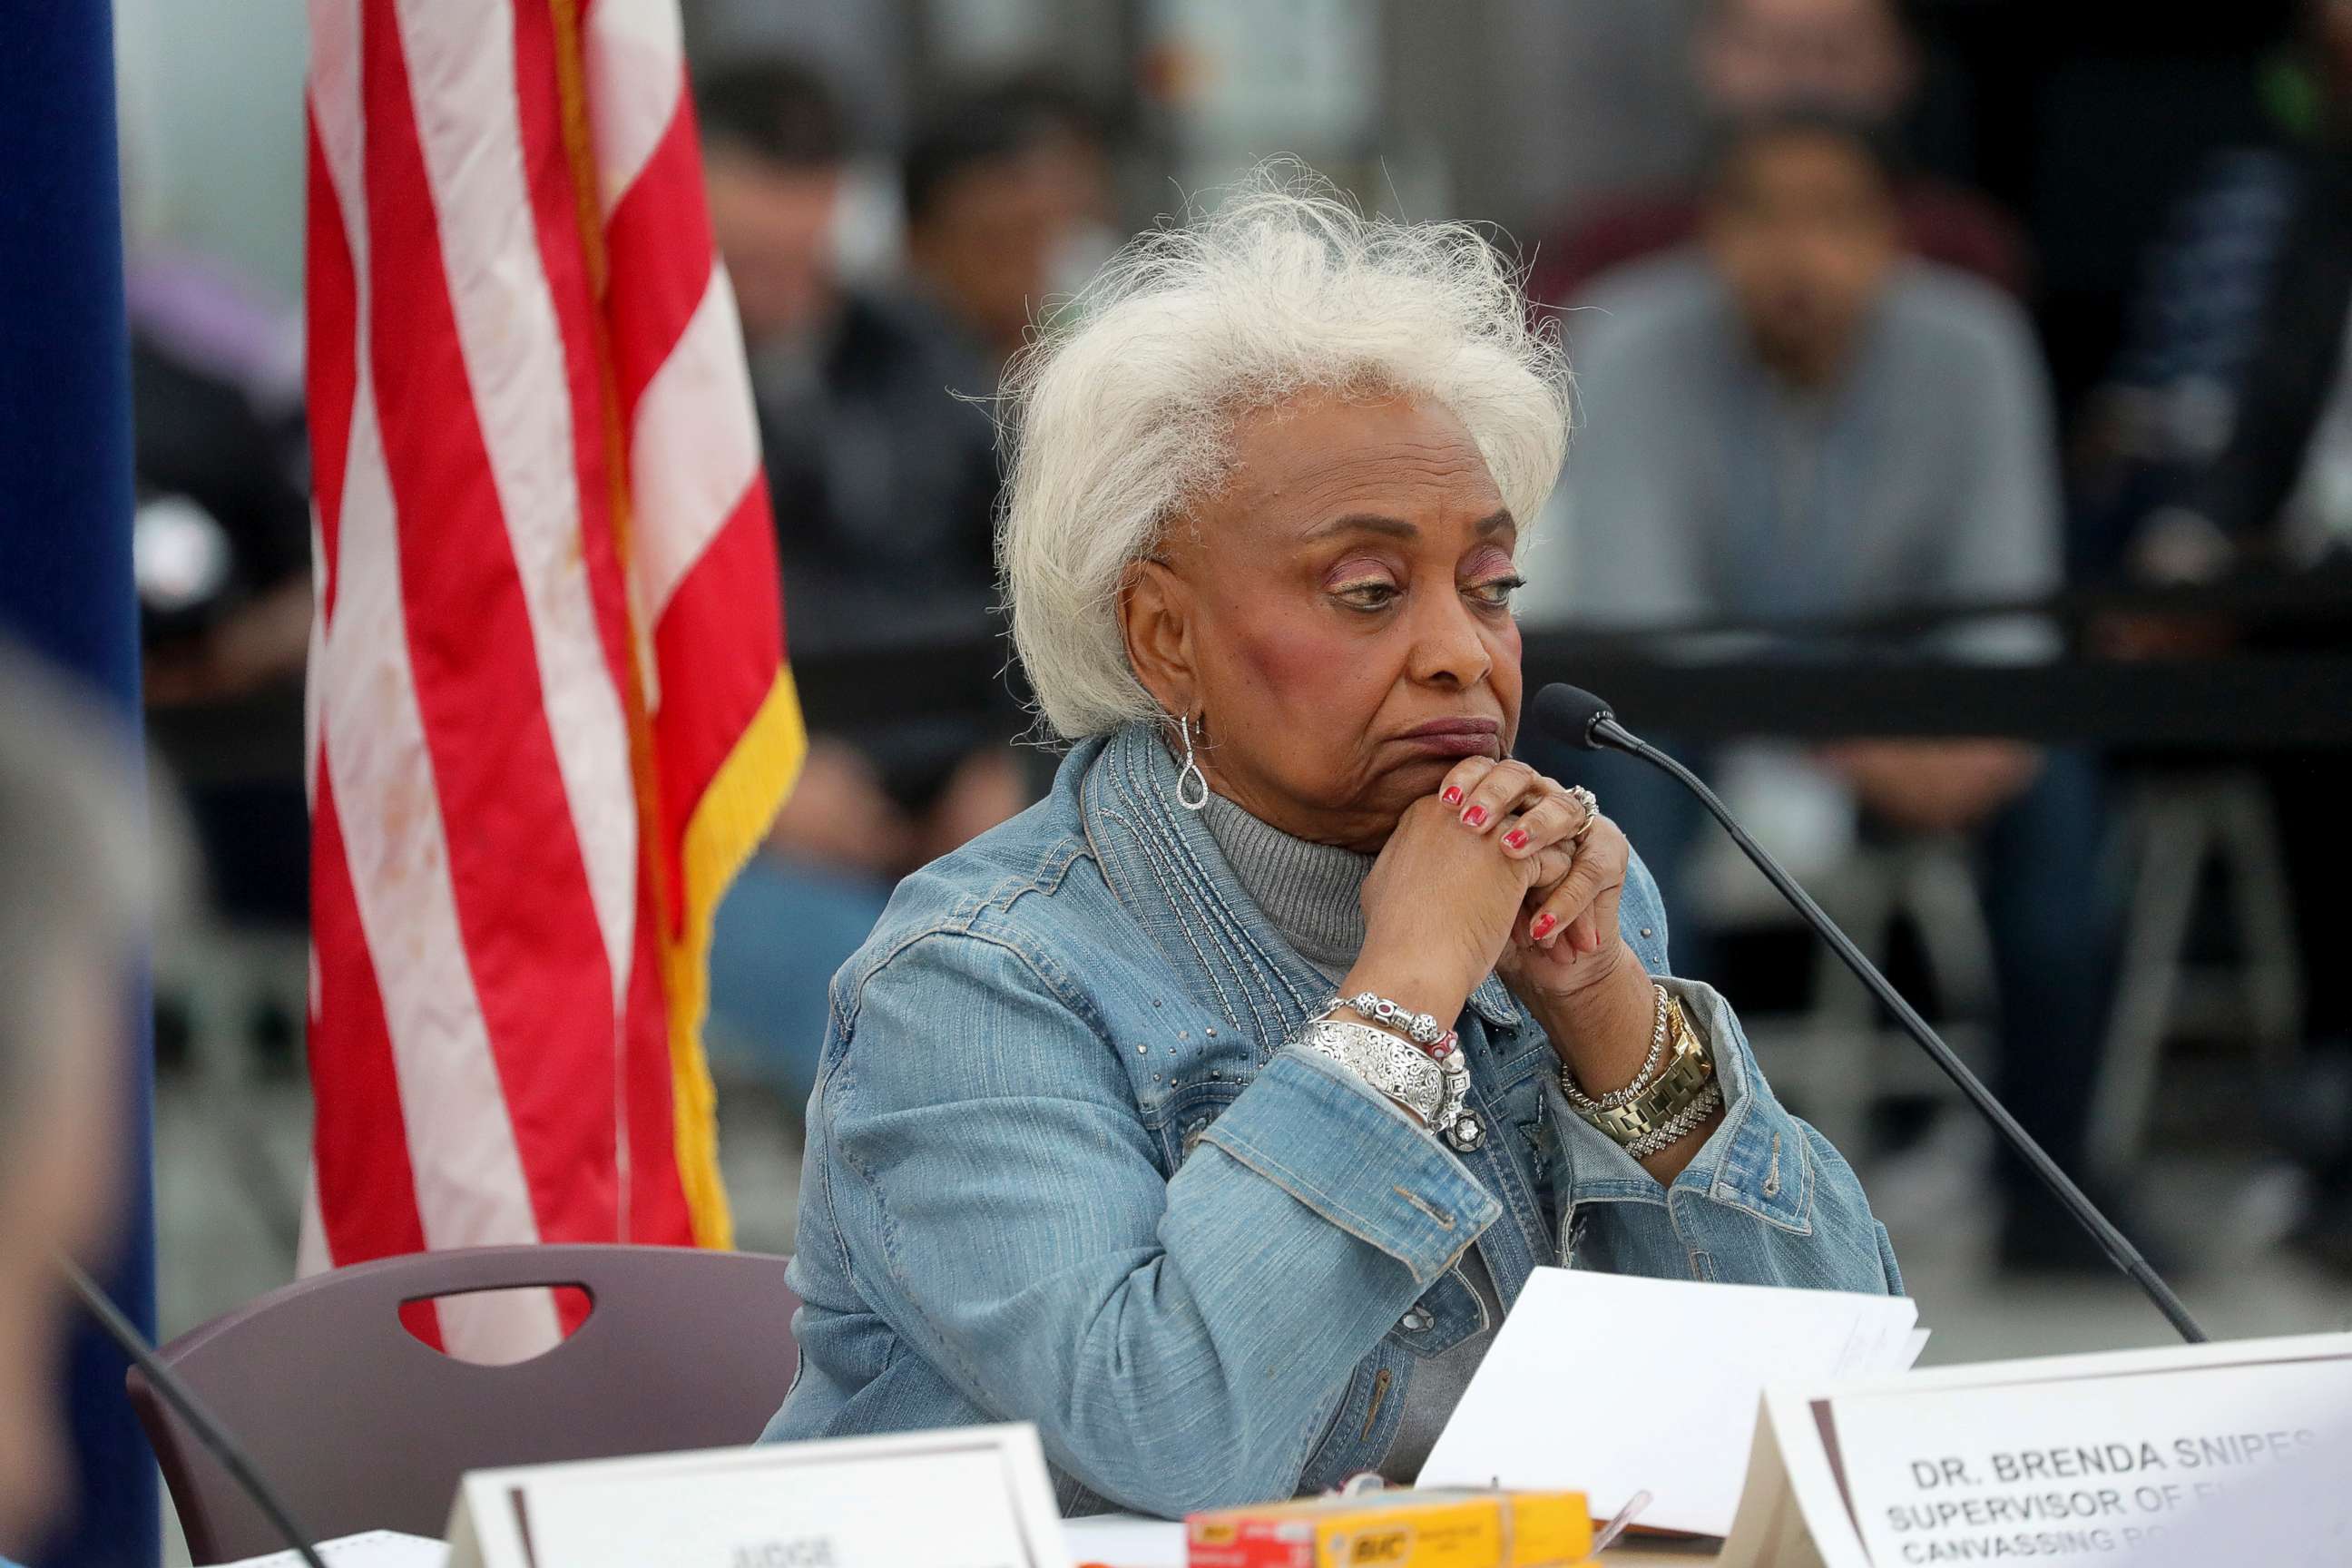 PHOTO: Broward County Supervisor of Elections Brenda Snipes explains to the canvassing board the discrepancy in vote counts during the hand count at the Broward County Supervisor of Elections office in Lauderhill, Fla., Nov. 17, 2018.